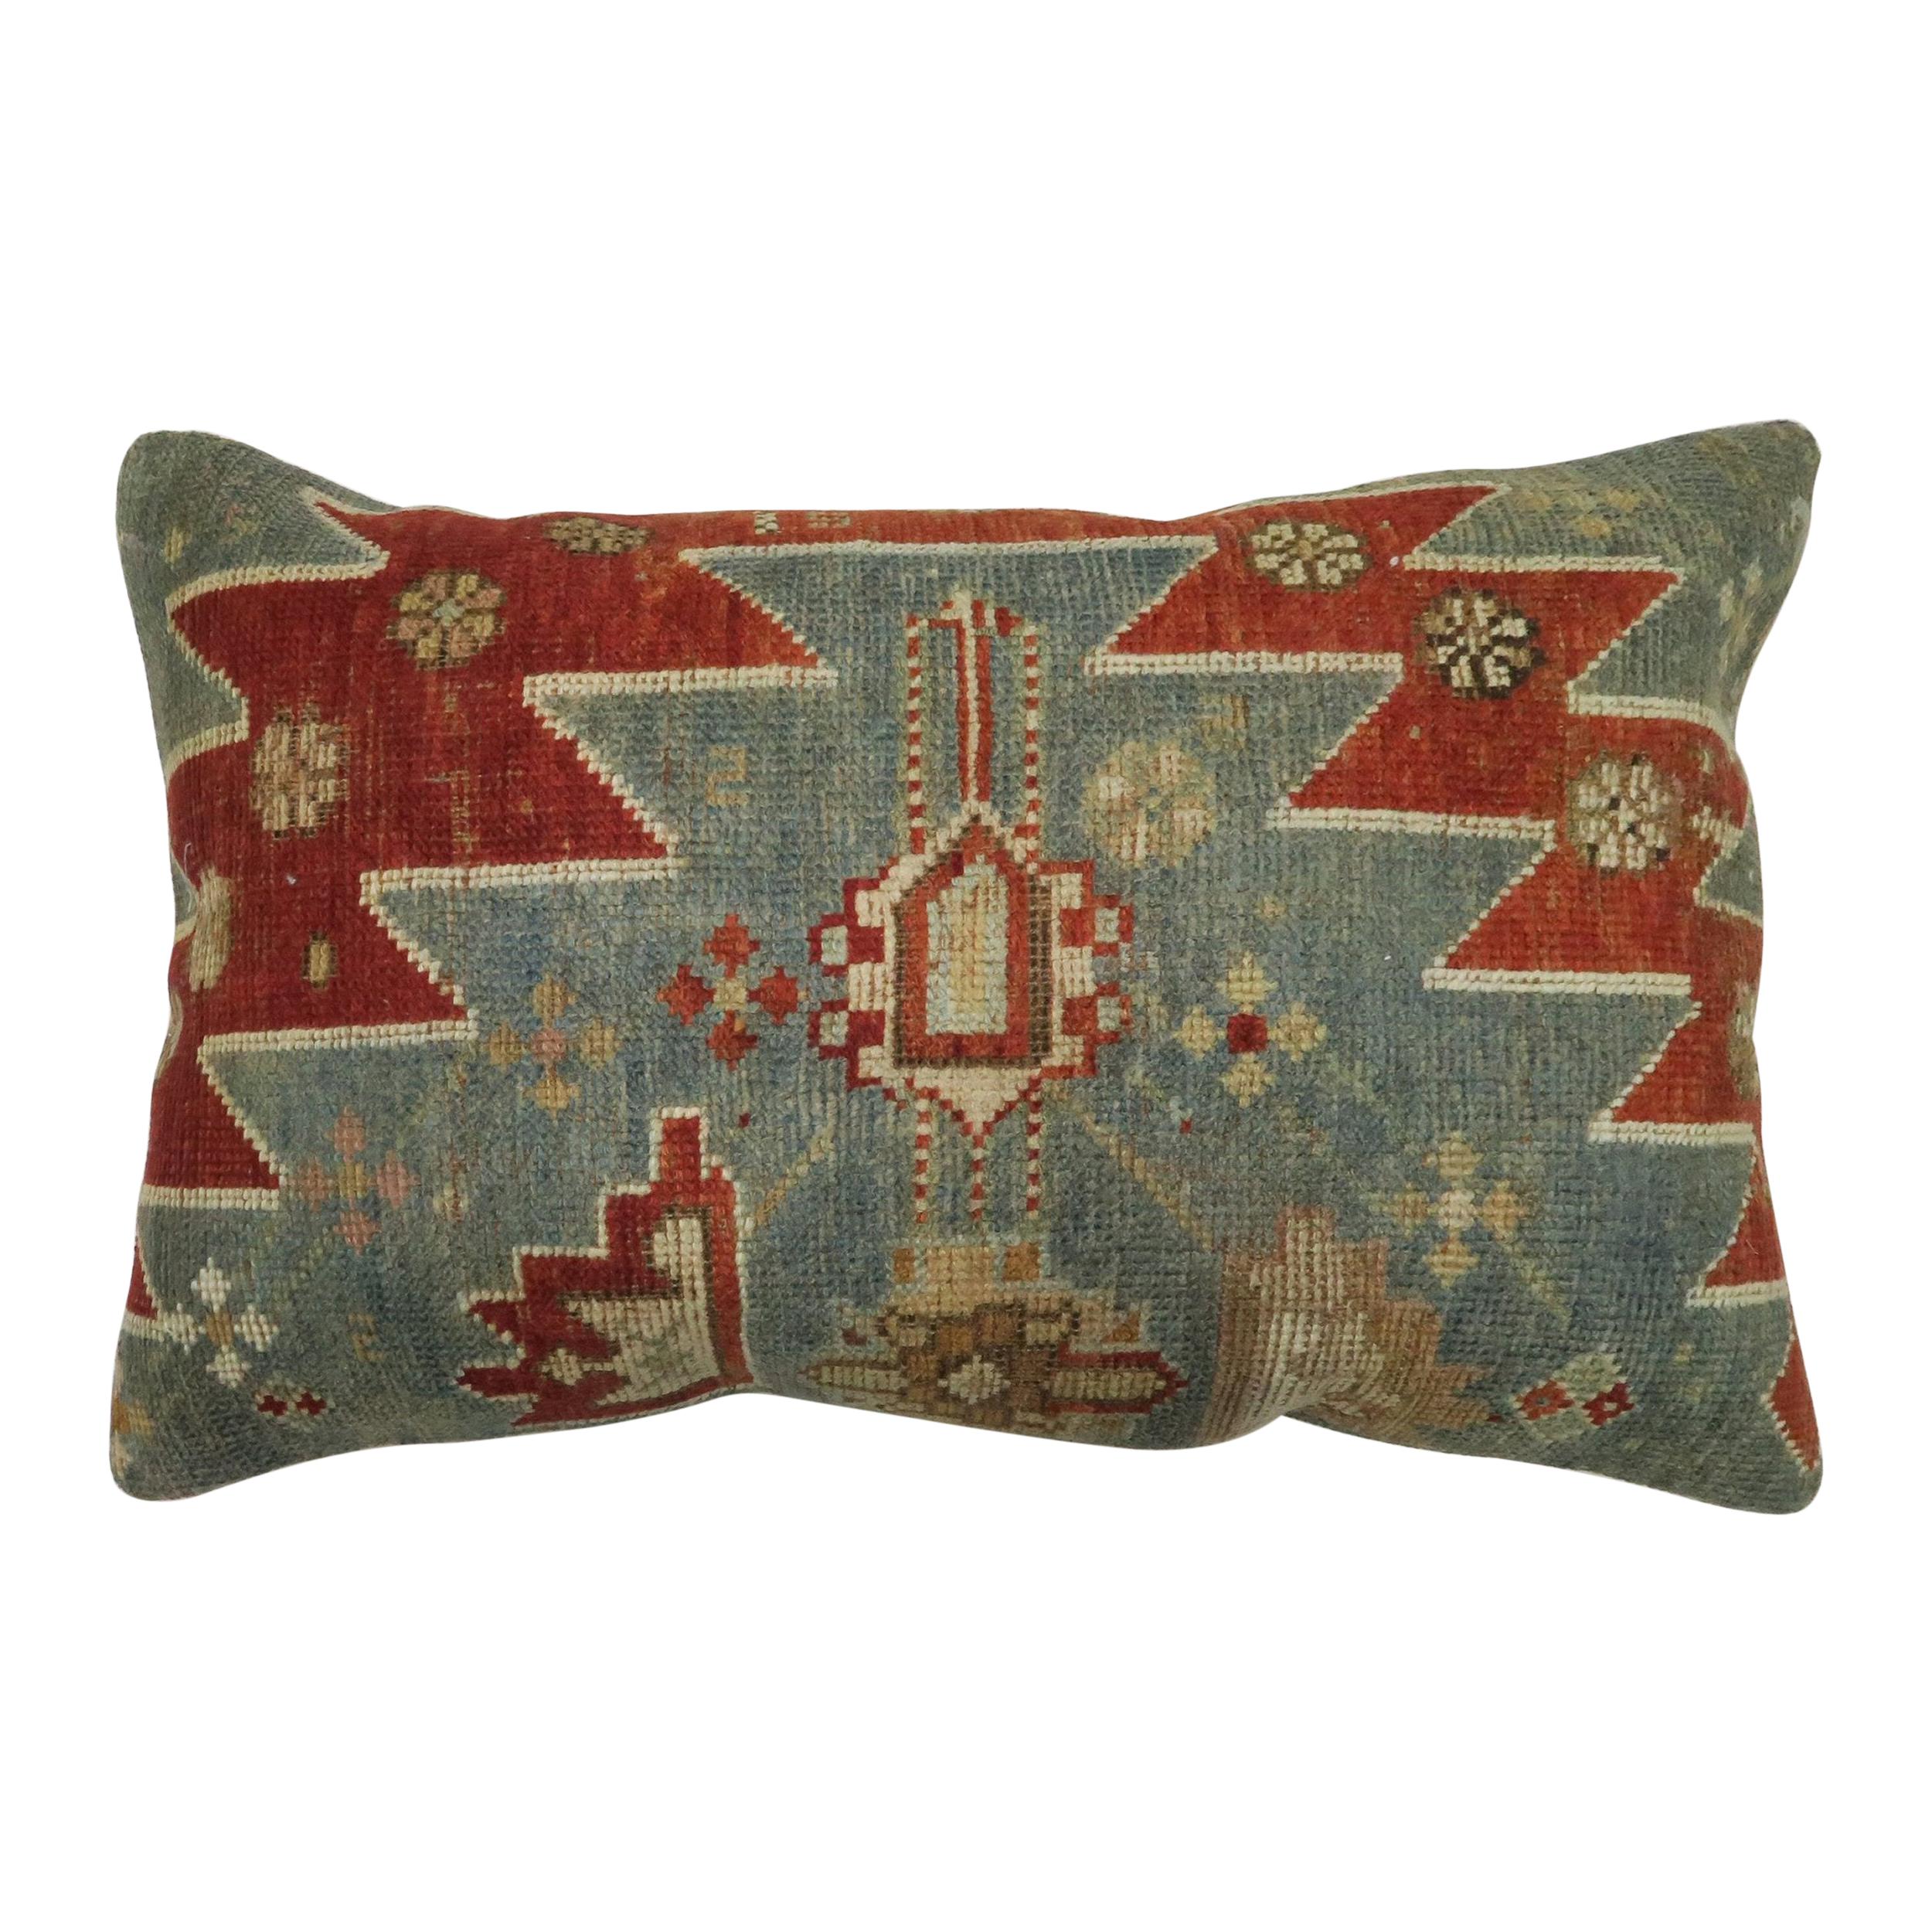 Rustic Antique Tribal Caucasian Lumbar Rug Pillow in Red and Soft Blue